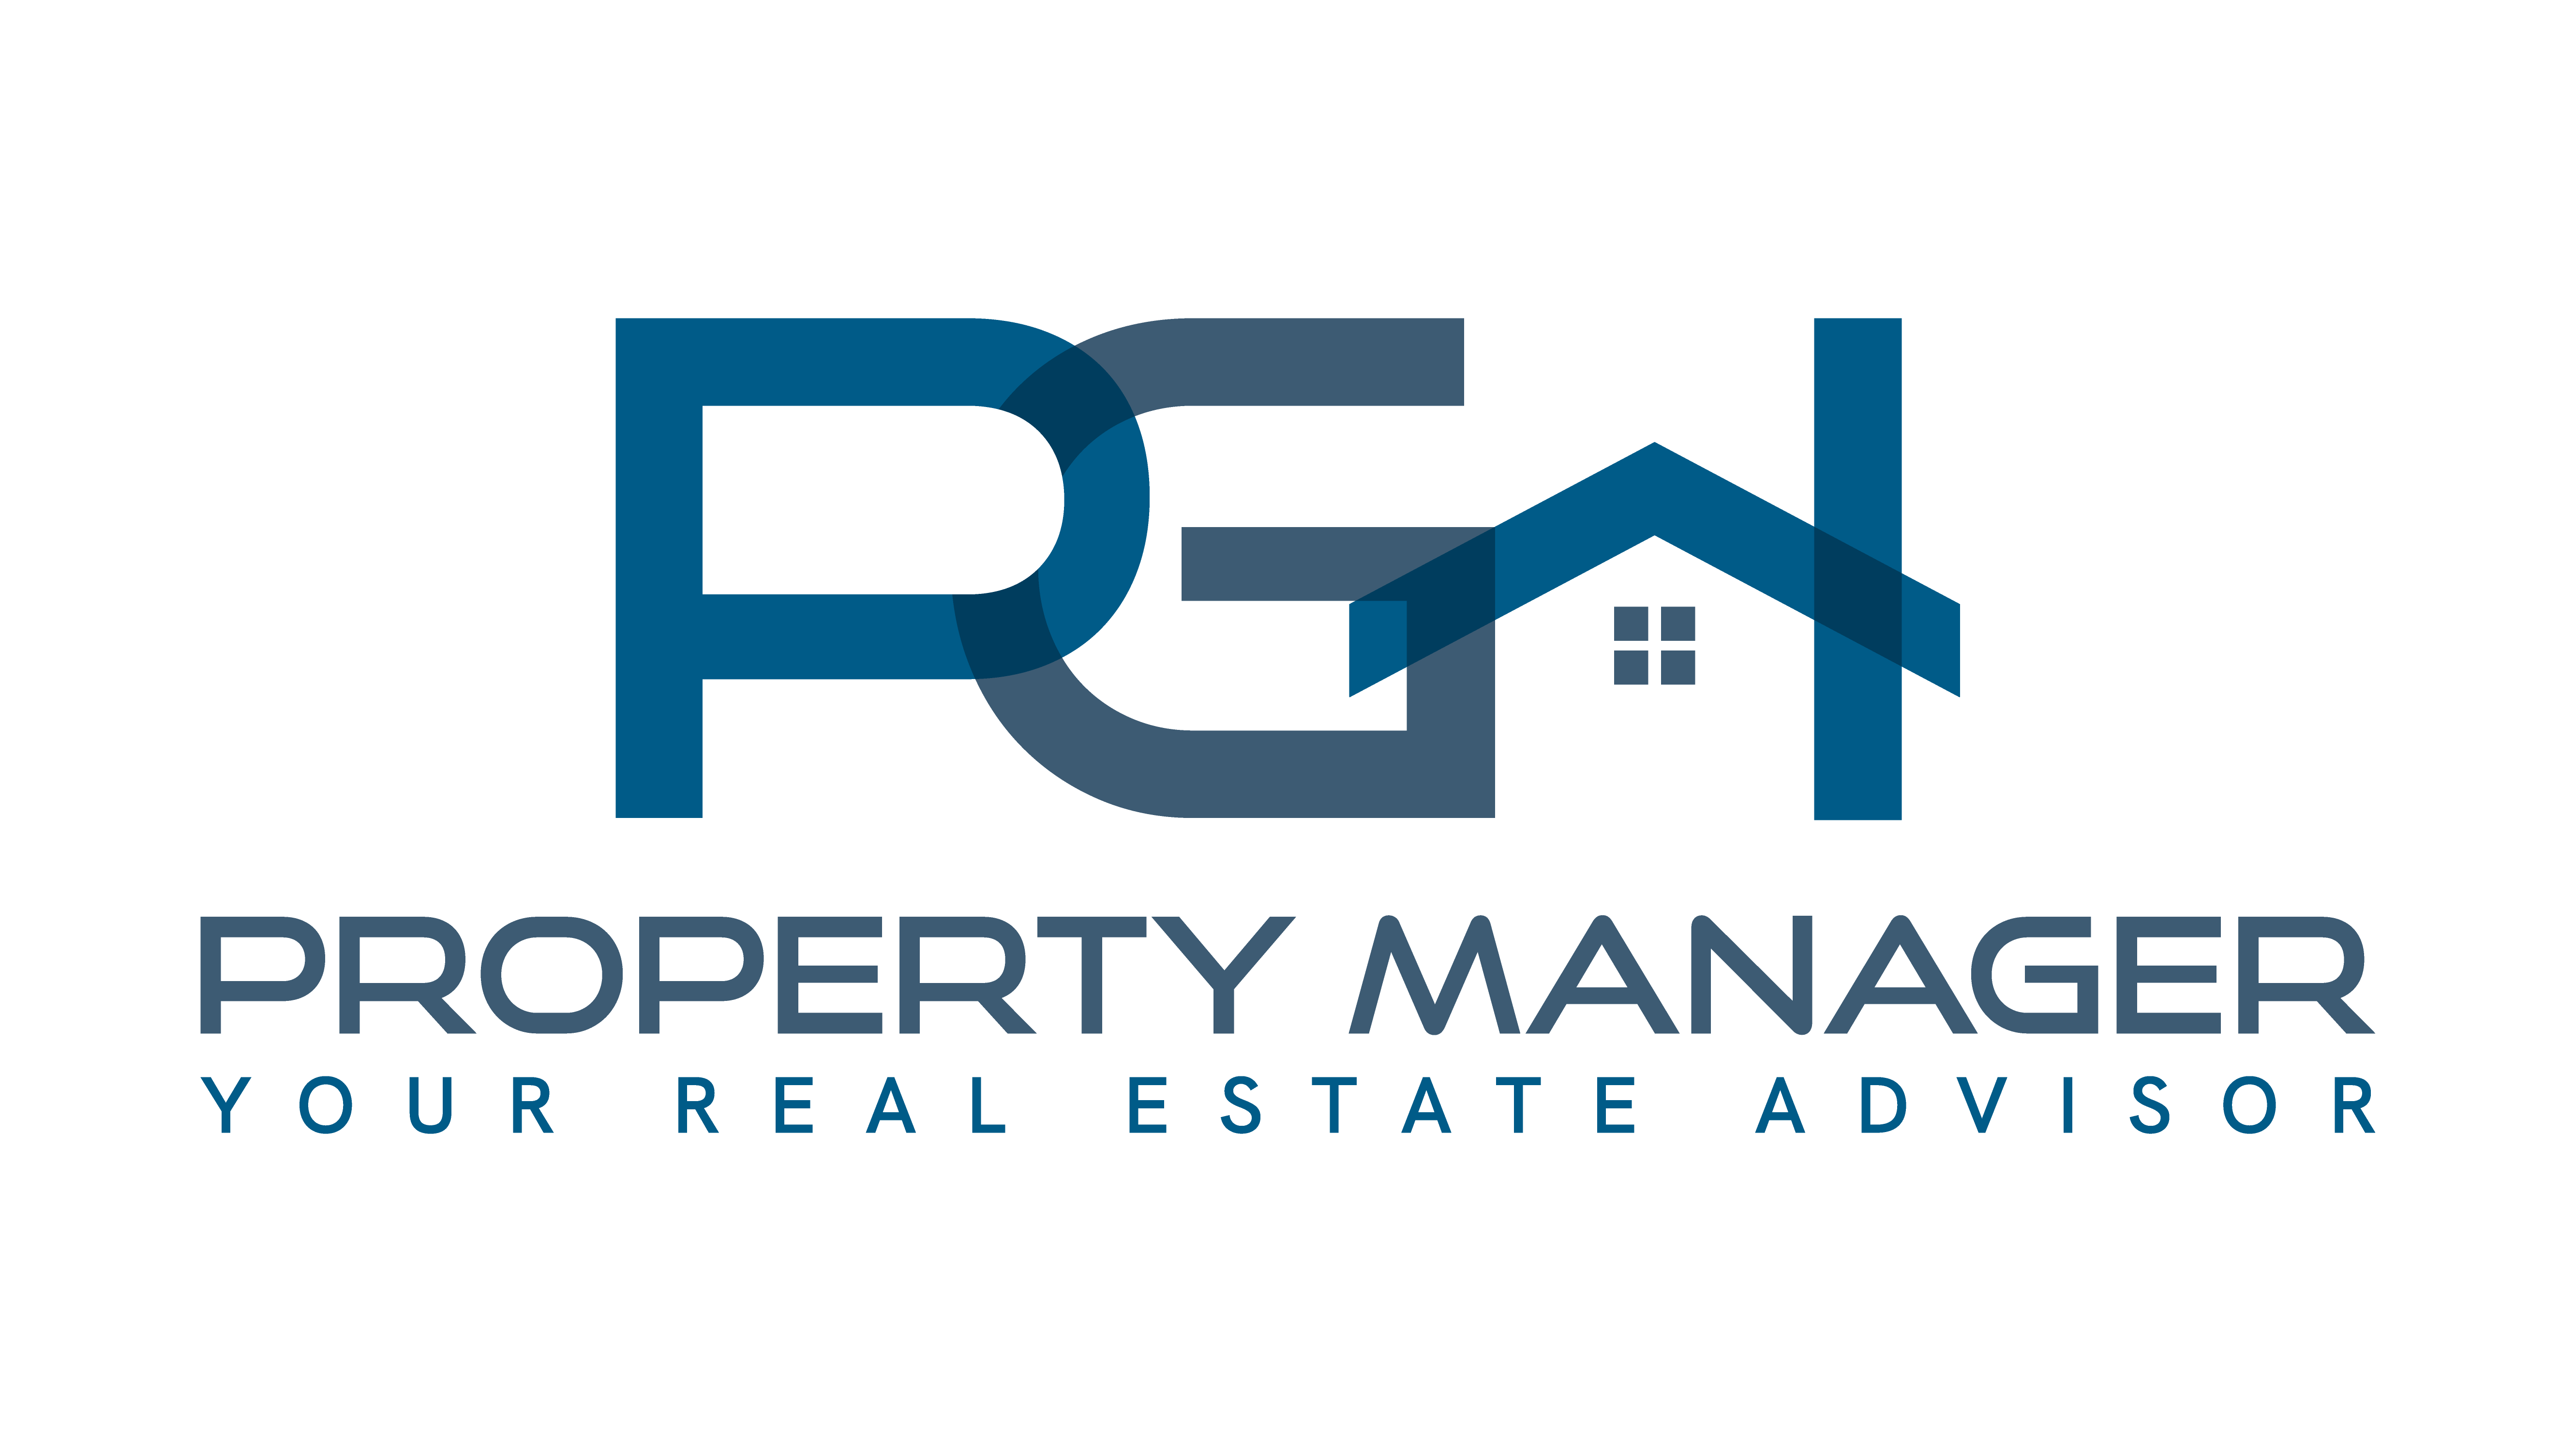 Pgh Property Manager's Logo